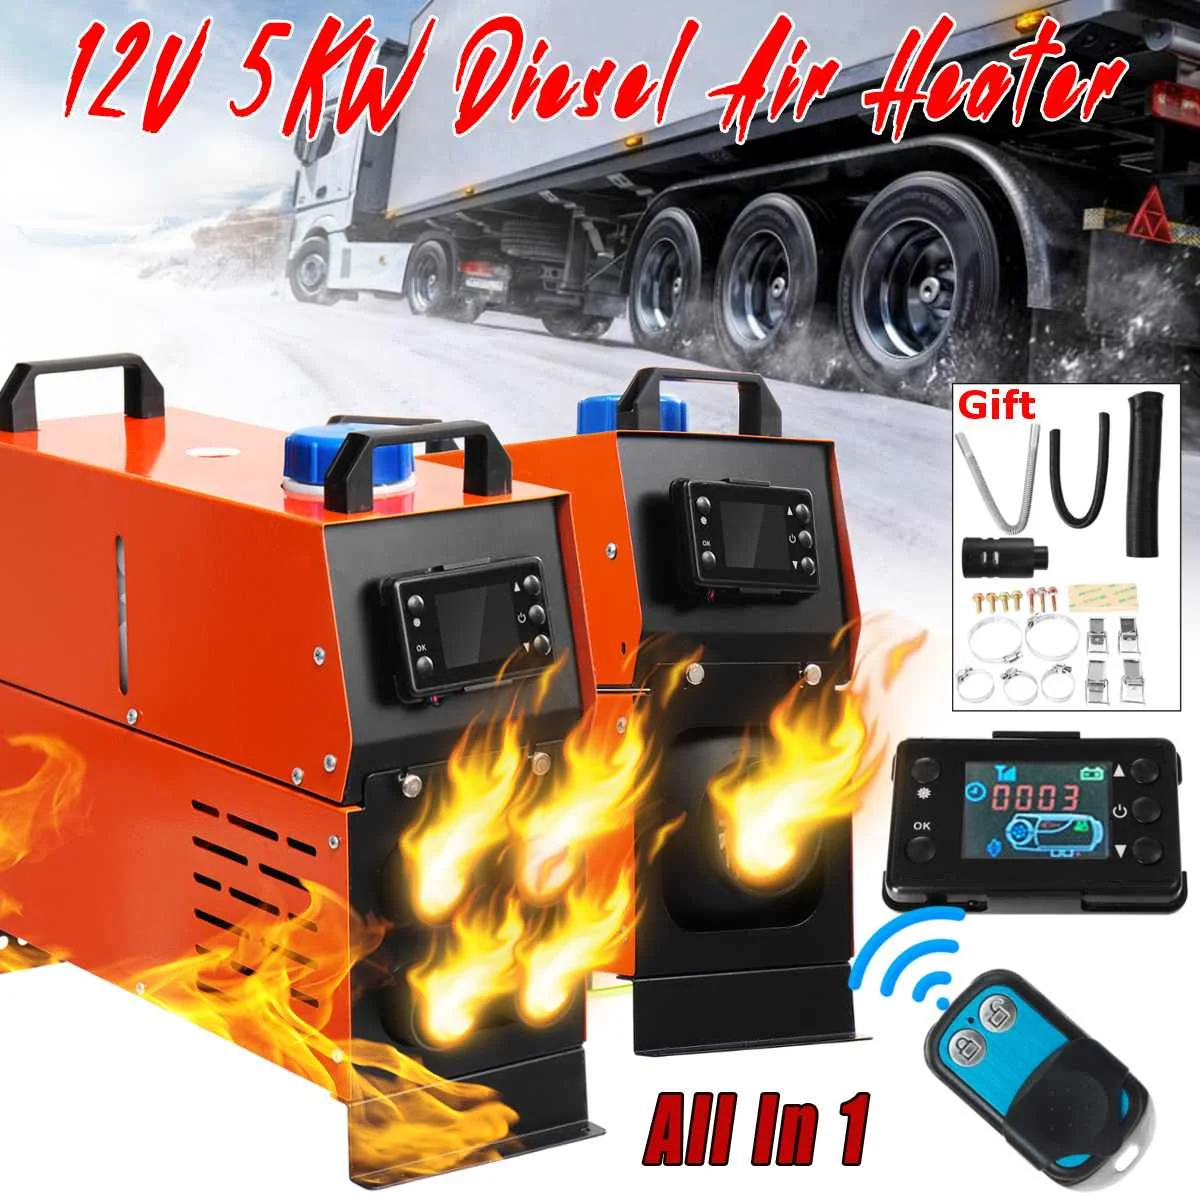 

Big Sales AUTSOME 5KW 12V All IN ONE Diesel Air Heater Thermostat LCD Remote Control Car Heater for Caravan Motorhome RV Trailer